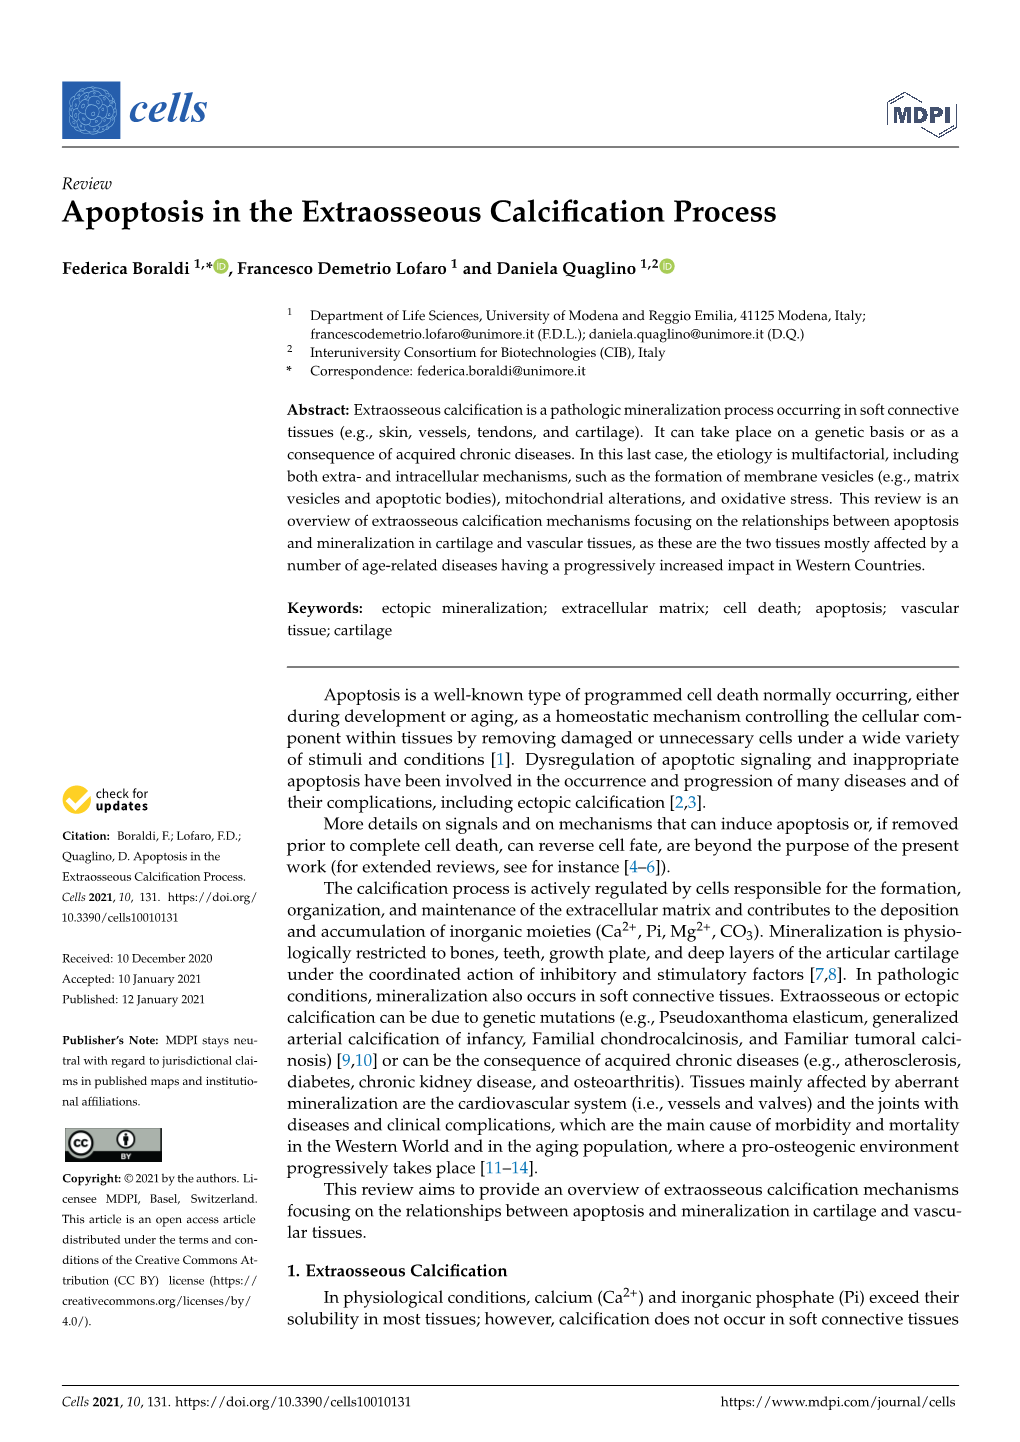 Apoptosis in the Extraosseous Calcification Process